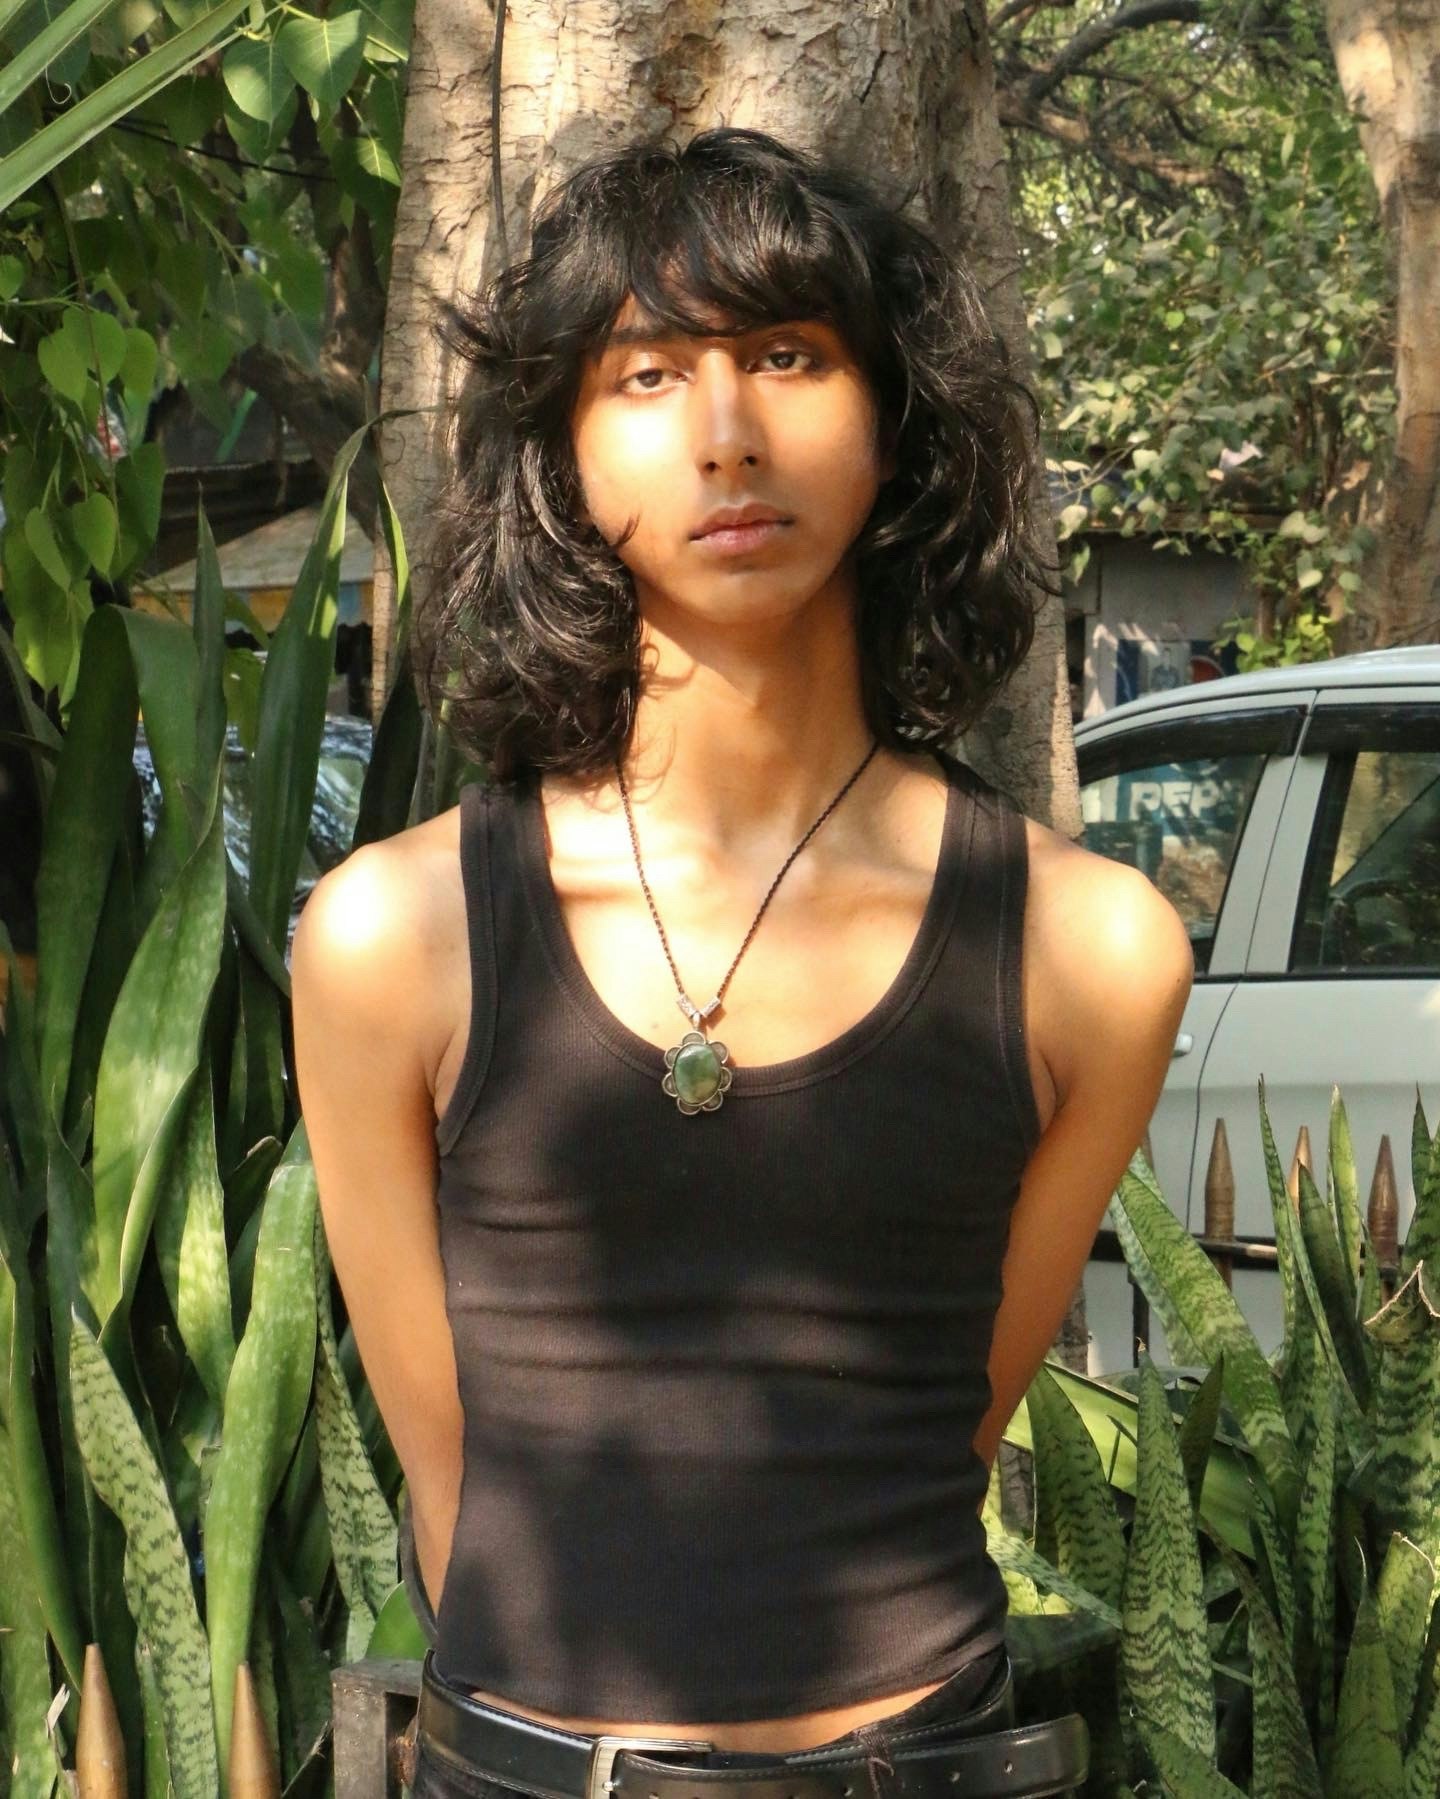 An image of Hriday Soni